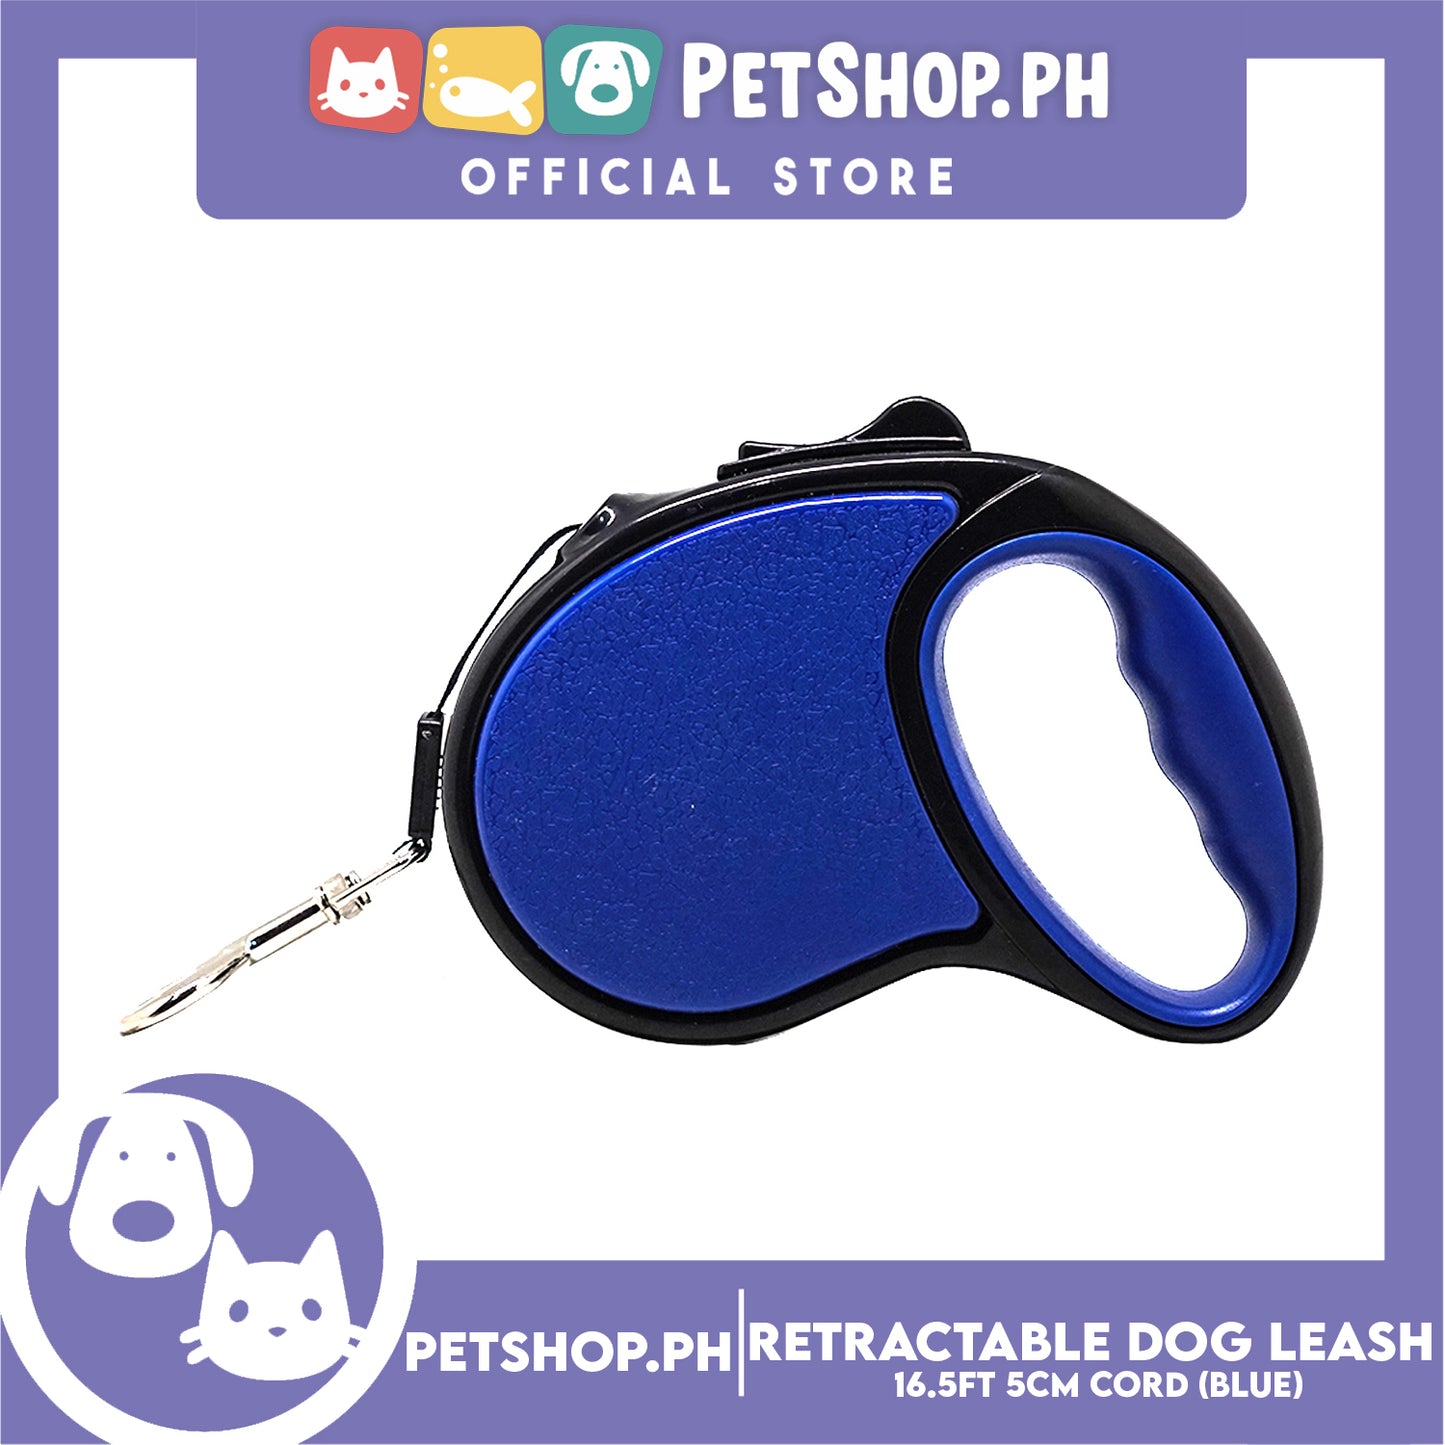 Retractable Dog Leash 16.5ft (5M) Cord with One Button Lock and Release for Up to 33lbs. Dog & Cats (Blue)